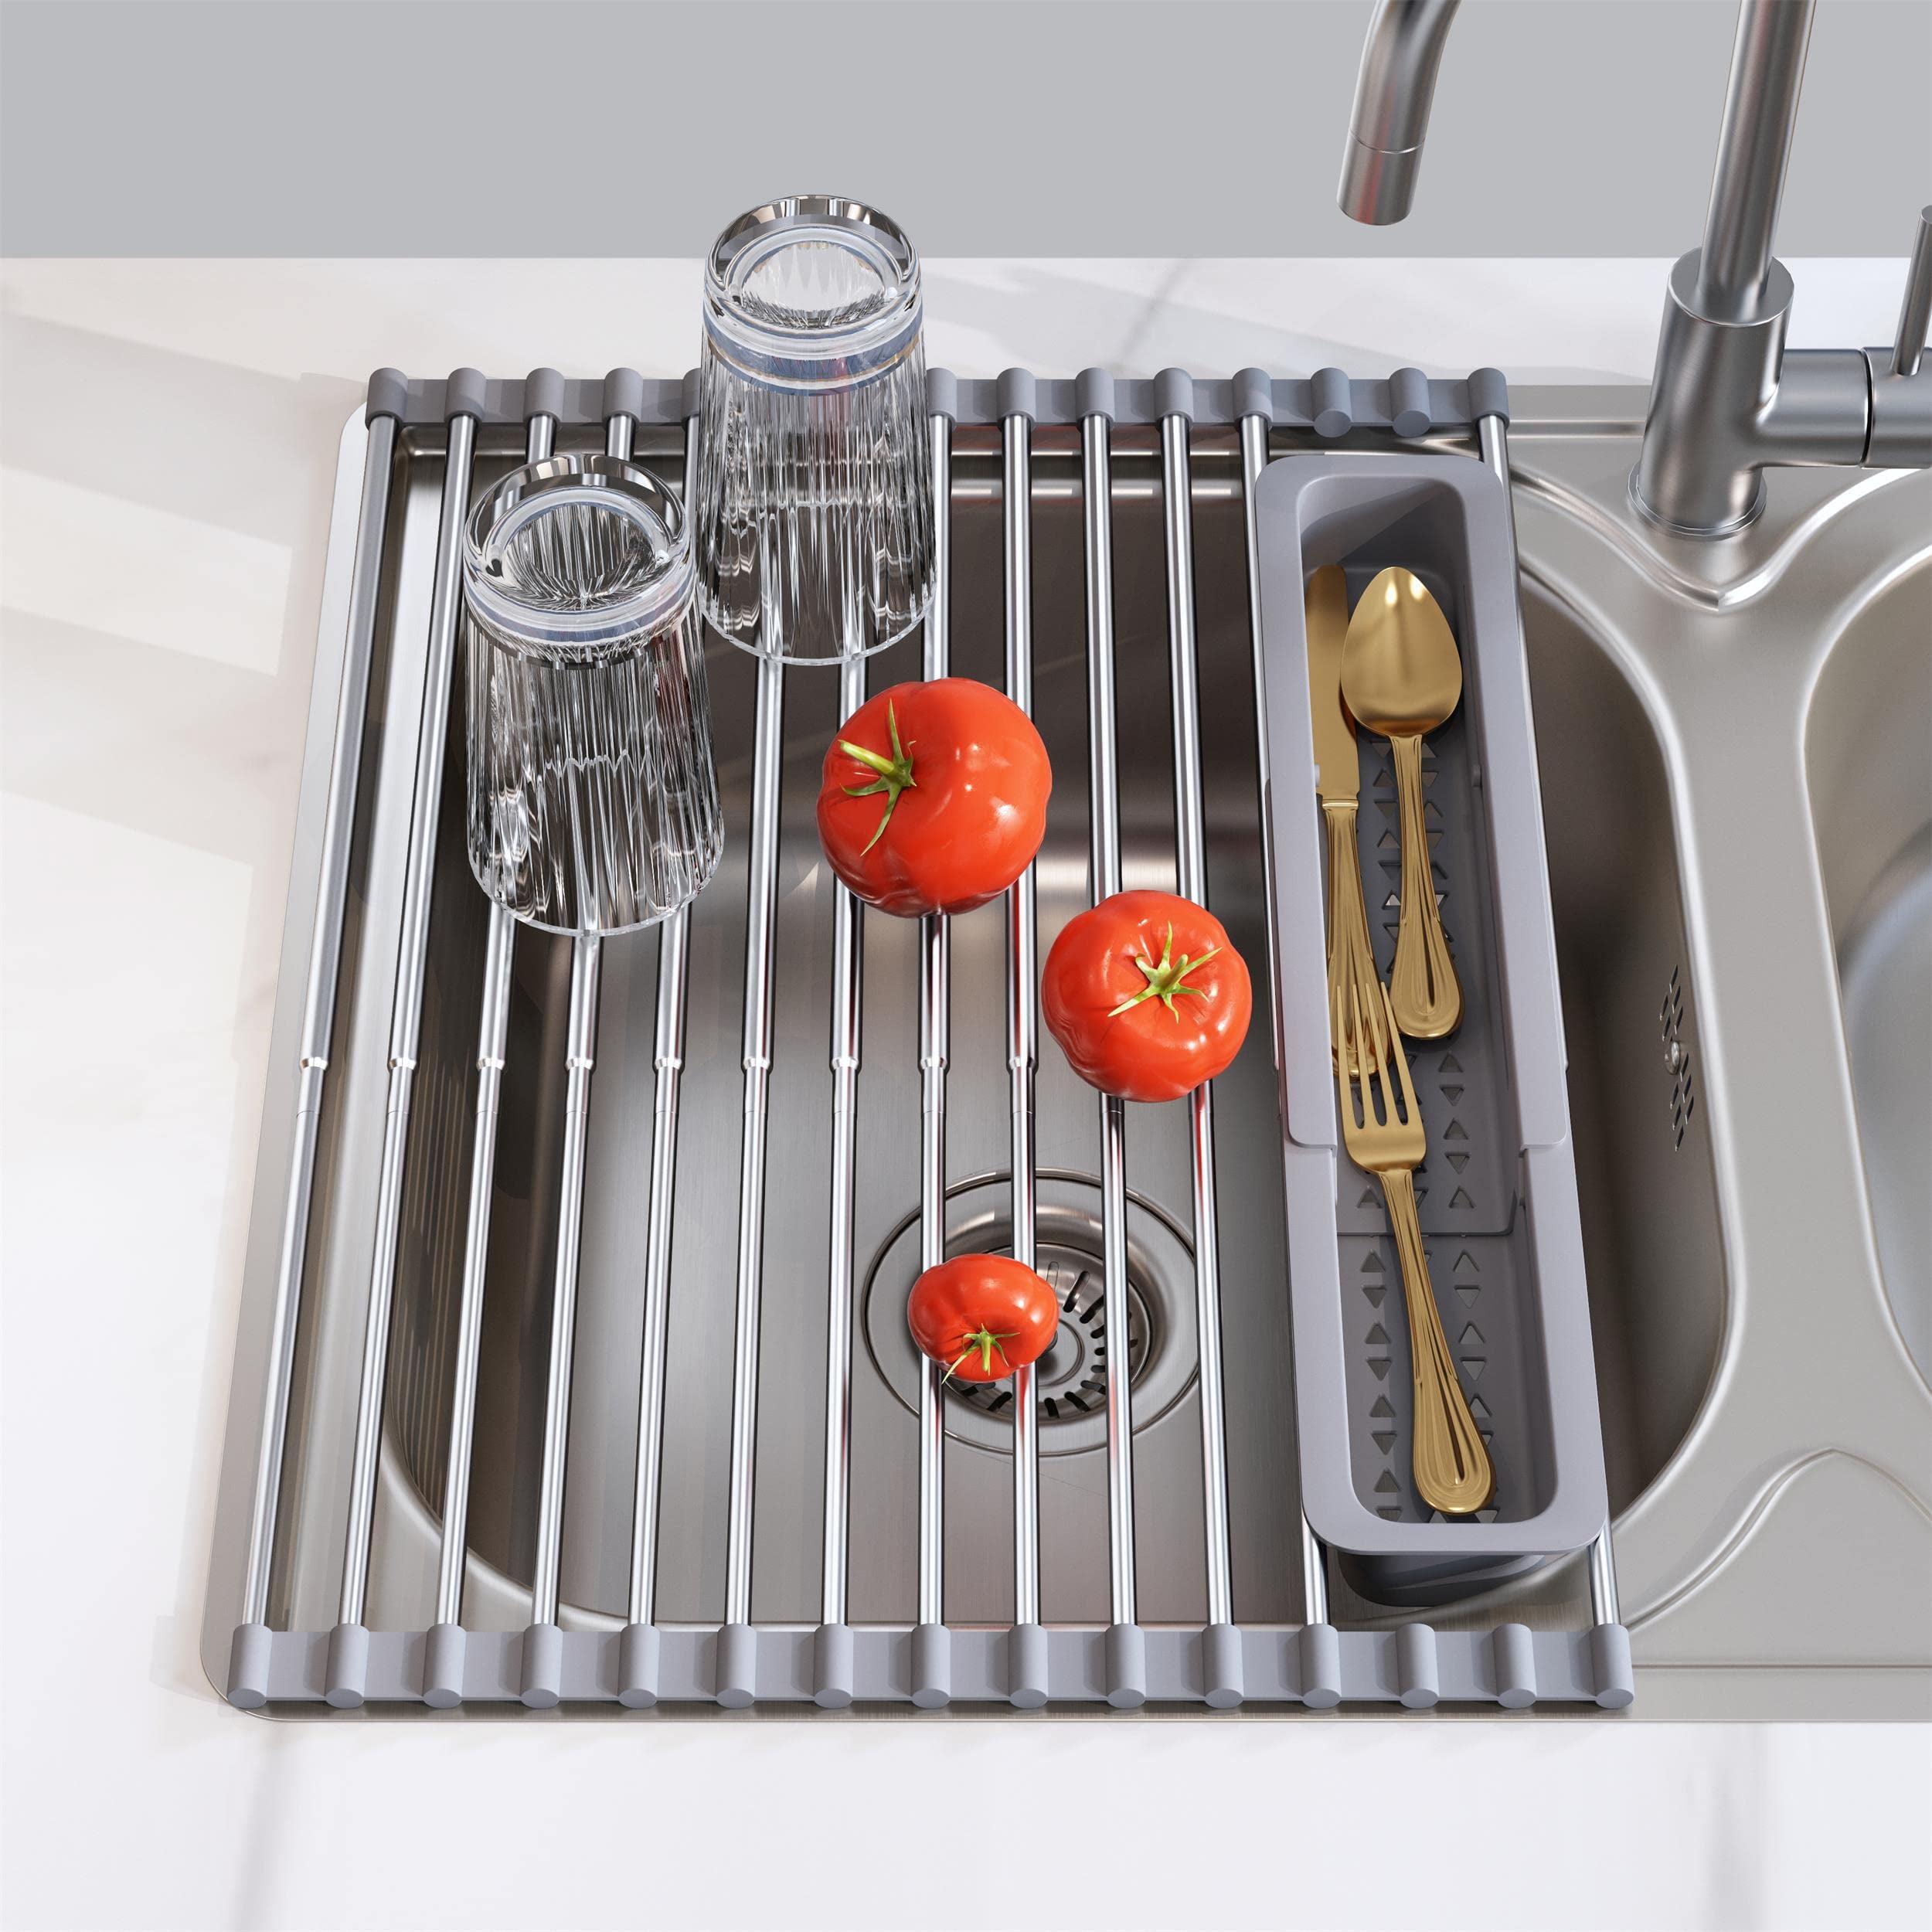  MAJALiS Sink Dish Drying Rack - Use for Countertops & in-Sinks  & Over-Sink, Stainless Steel Dish Drainers for Kitchen Counter, Inside Sink Dish  Dryer Racks, Kitchen Organizer, Silver